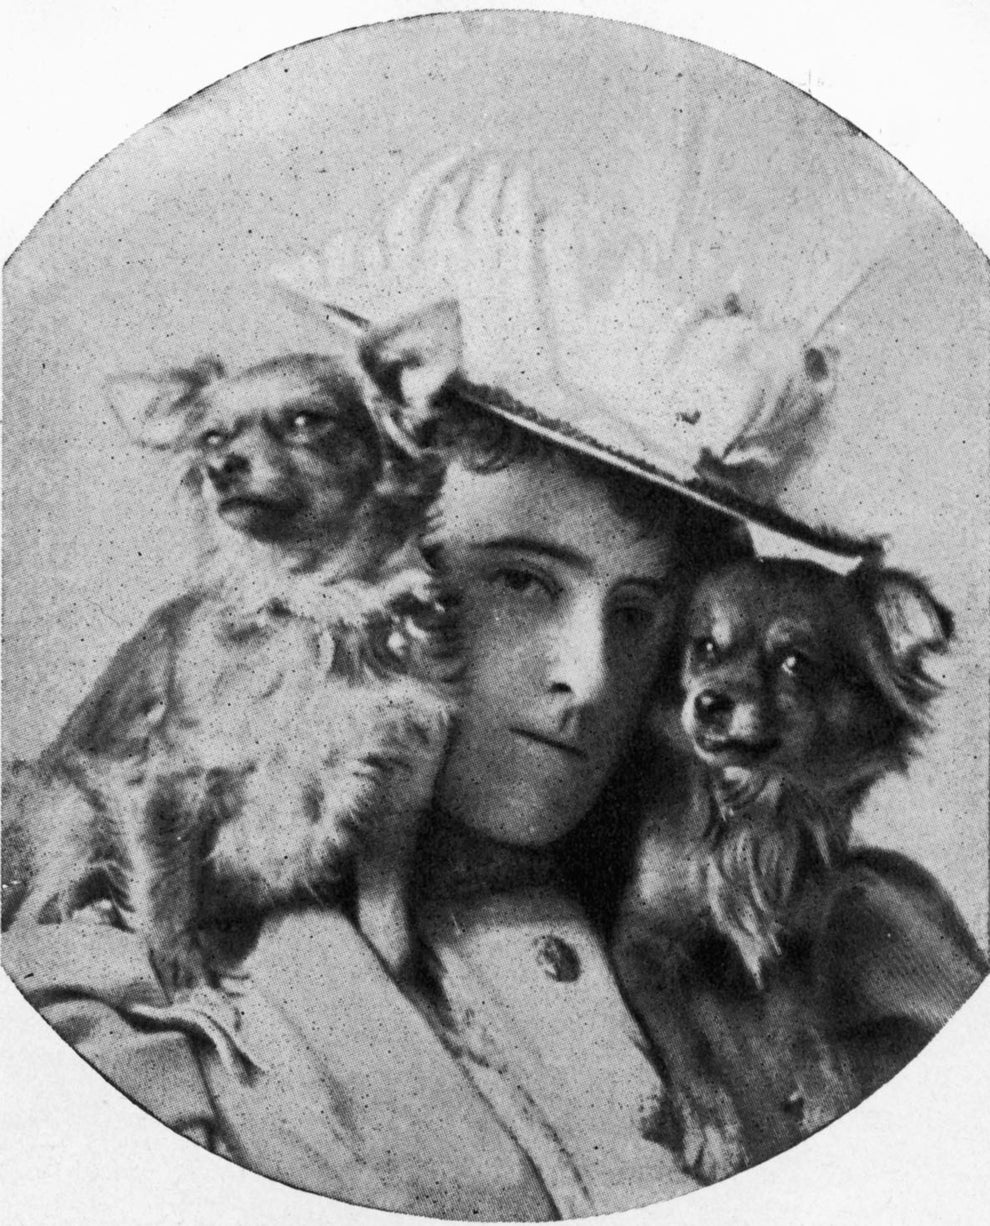 Edith Wharton, the first woman to be award the Pulitzer Prize for literature.